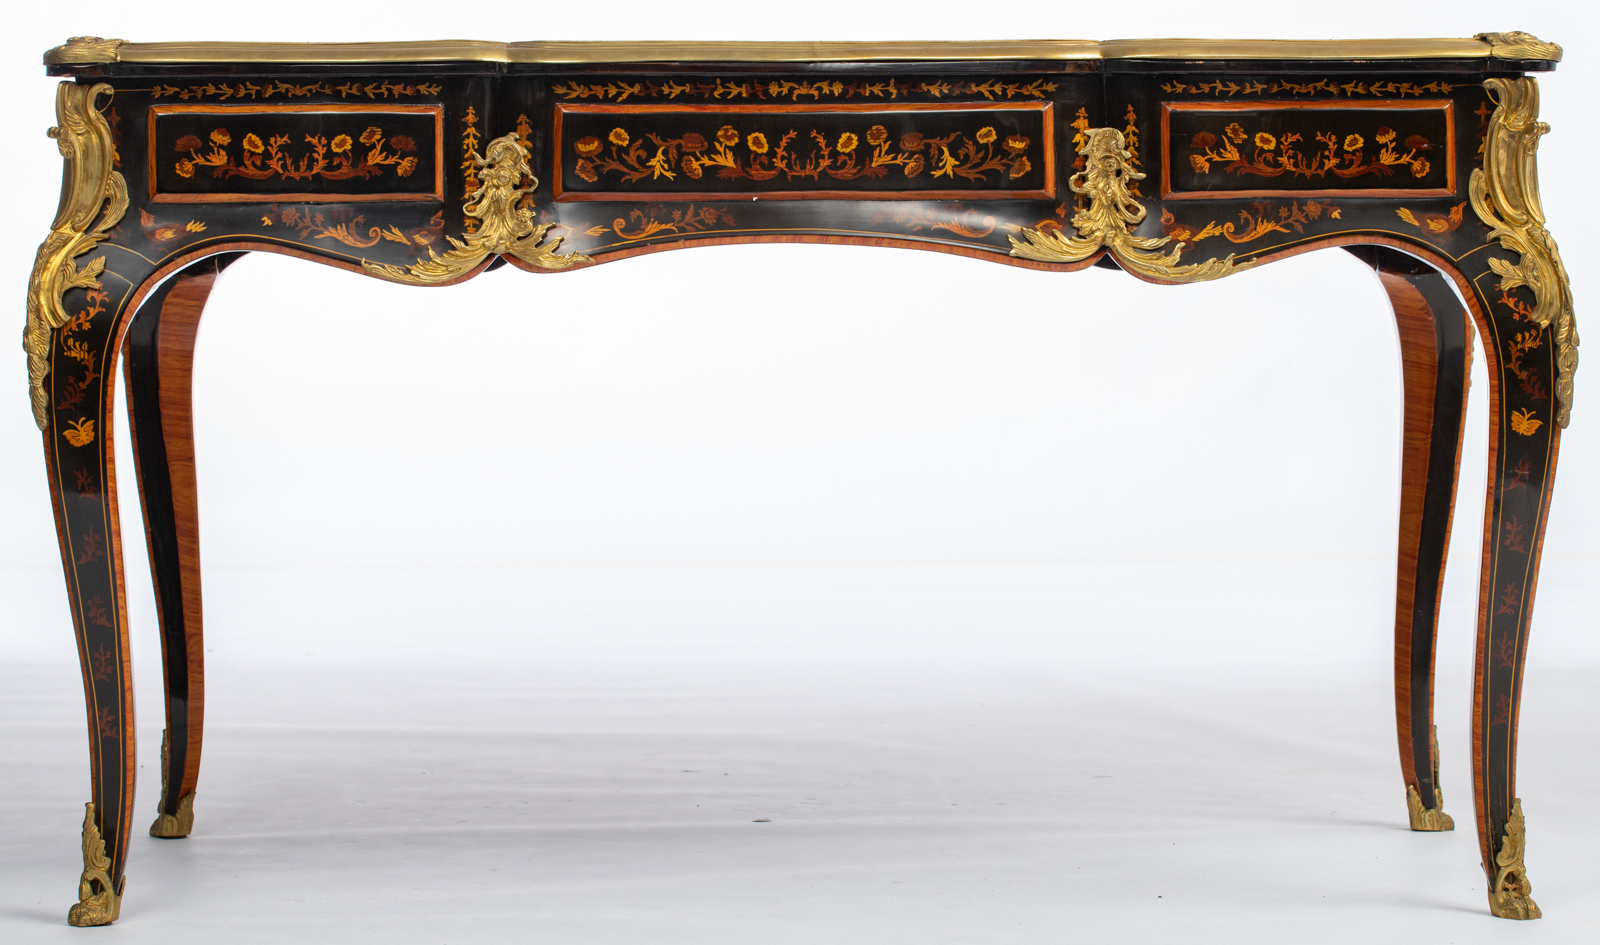 A fine Louis XV style lacquered bureau plat, decorated with gilt bronze mounts and rich marquetry of - Image 4 of 8